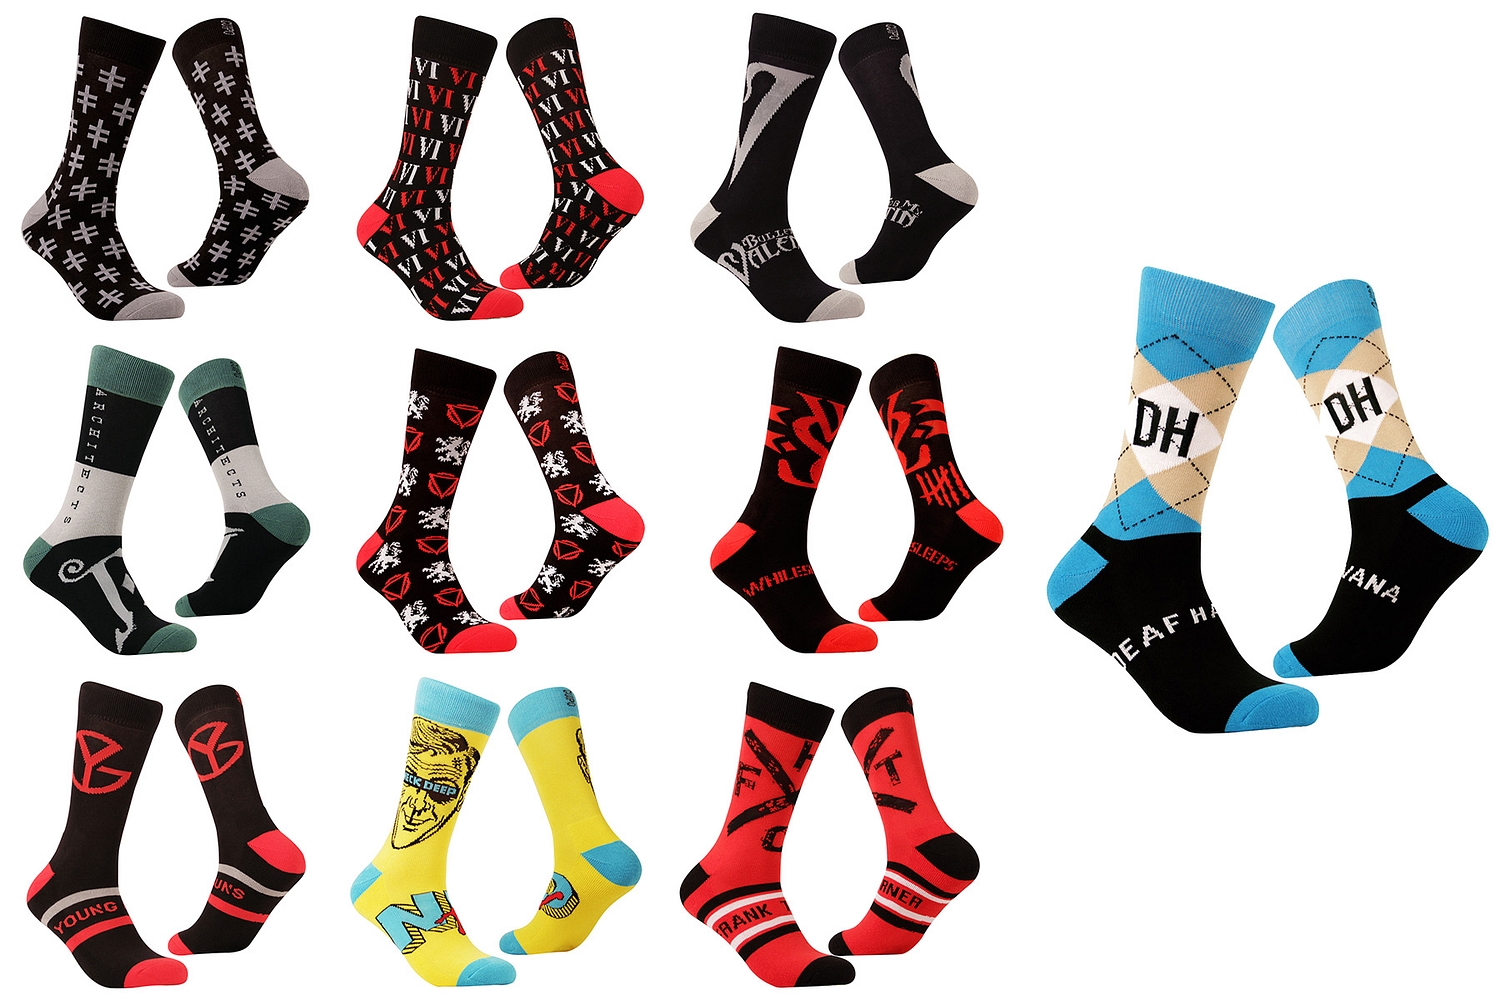 Win ten pairs of Cuipo artist socks, from Young Guns, Neck Deep, YMAS and more